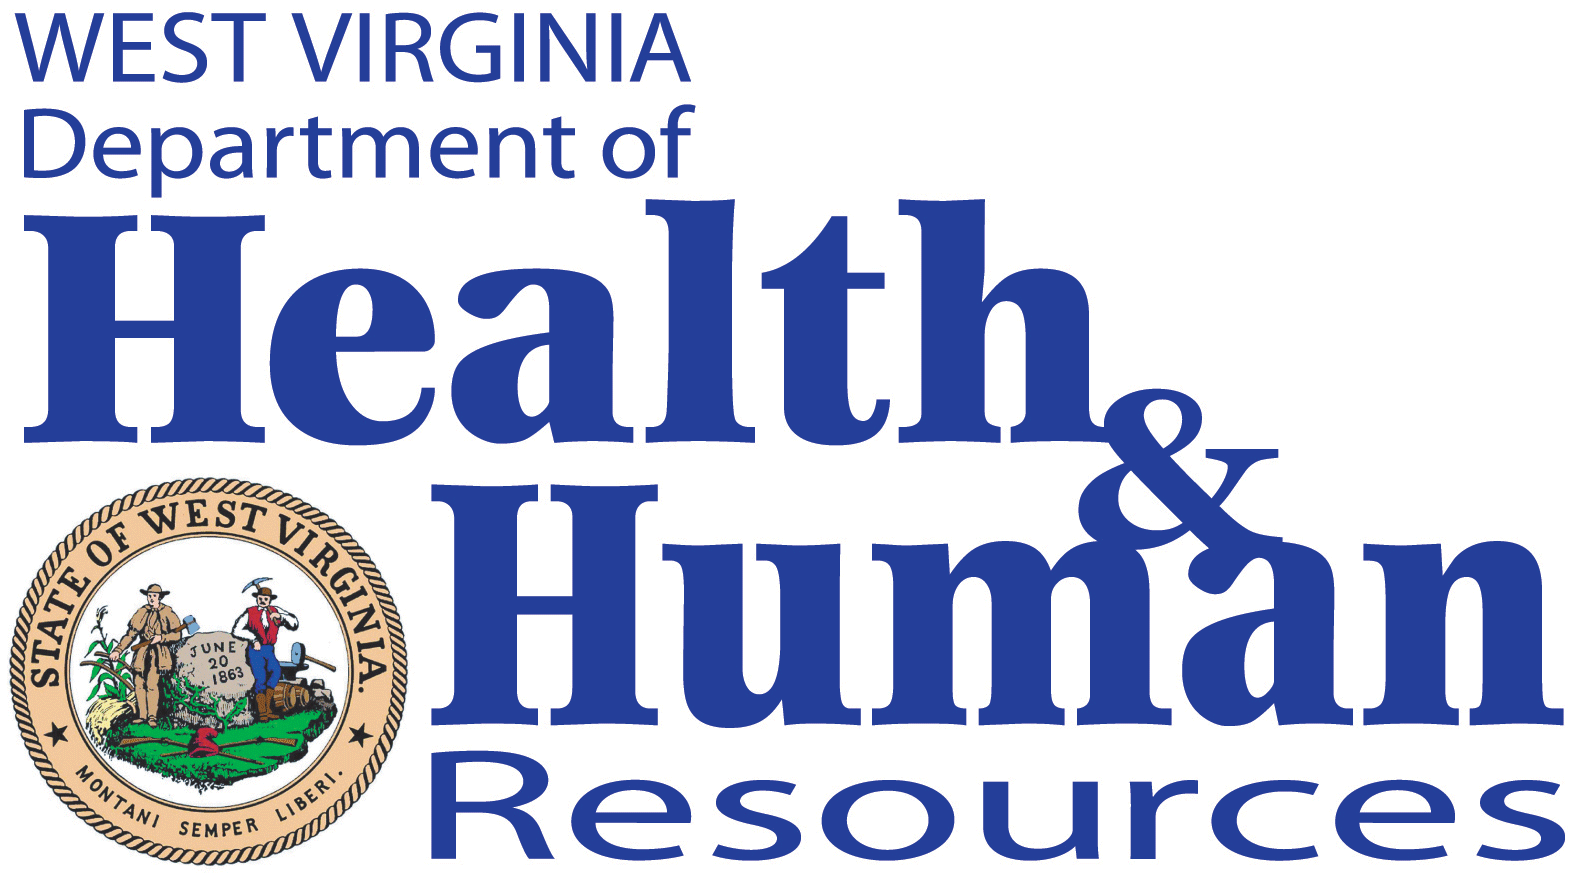 West Virginia Department of Health and Human Resources logo